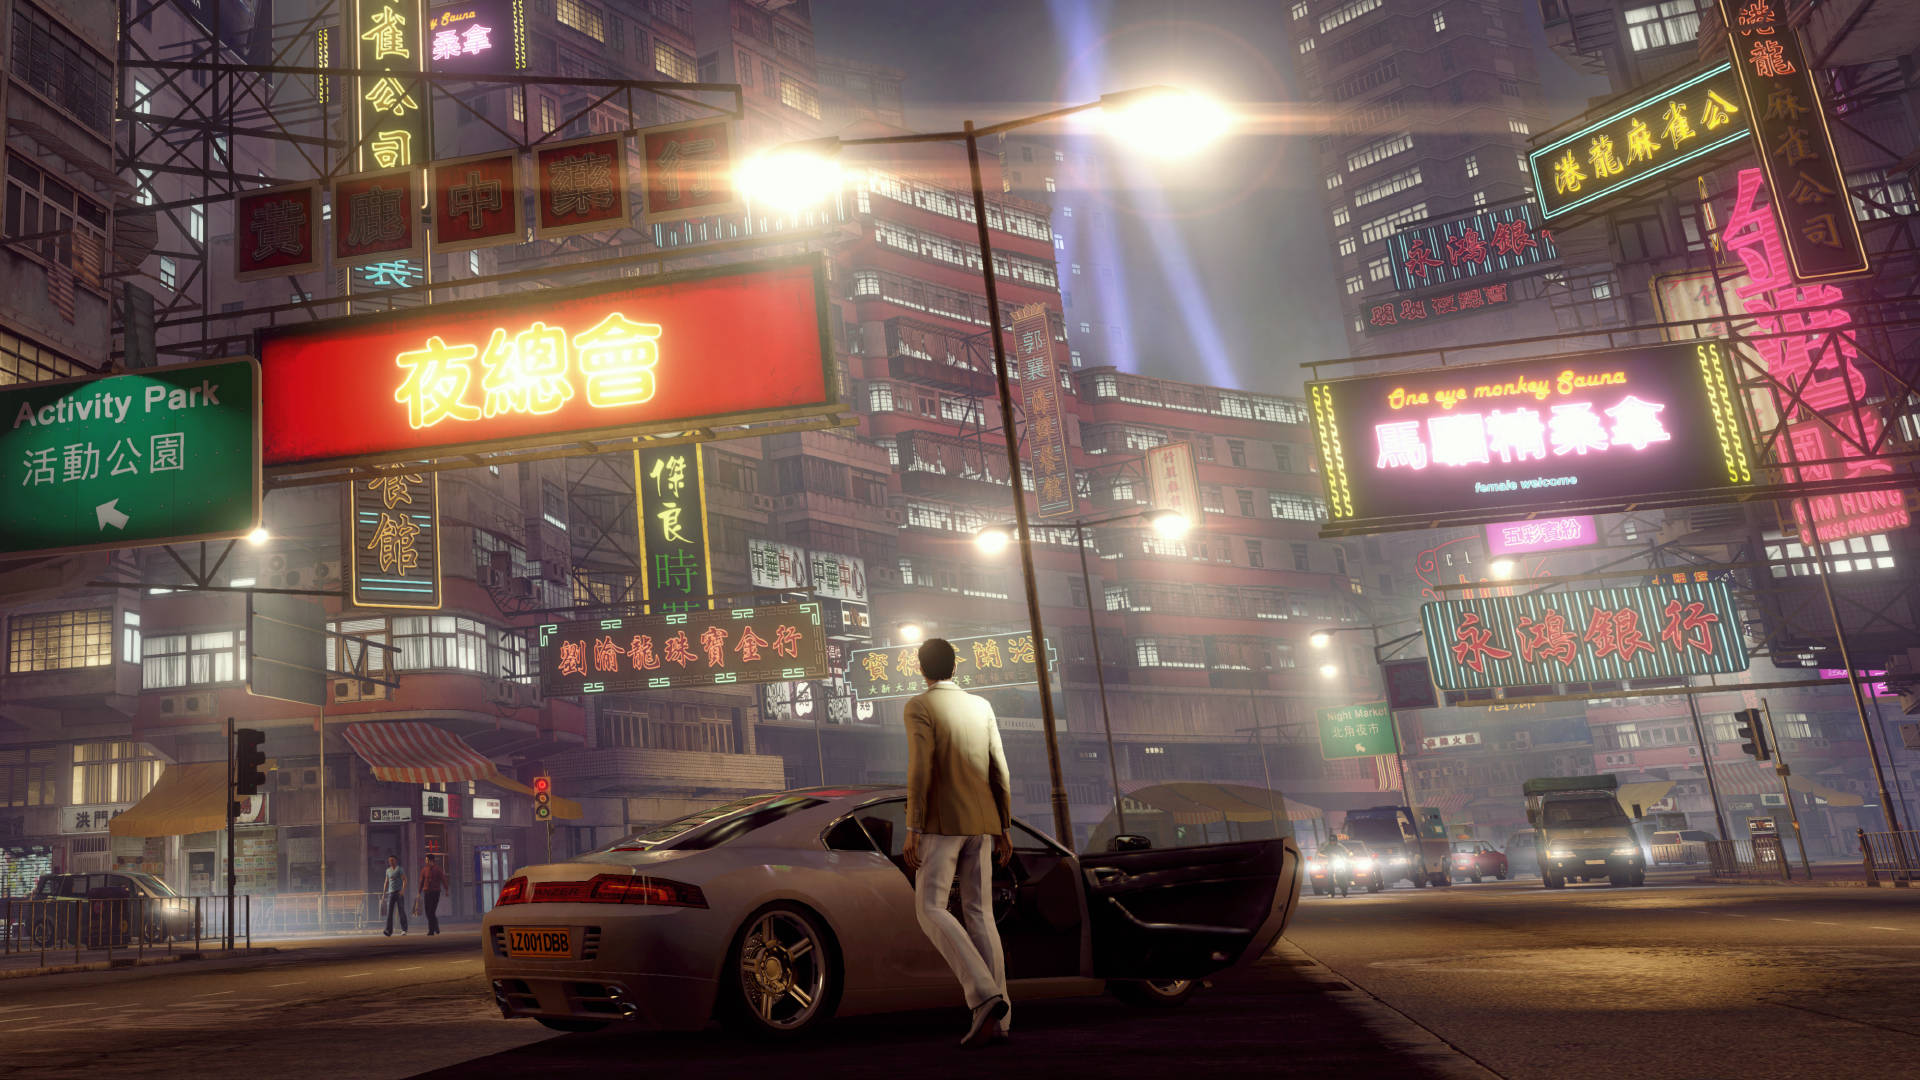 Download Sleeping Dogs Action Game Wallpaper | Wallpapers.com